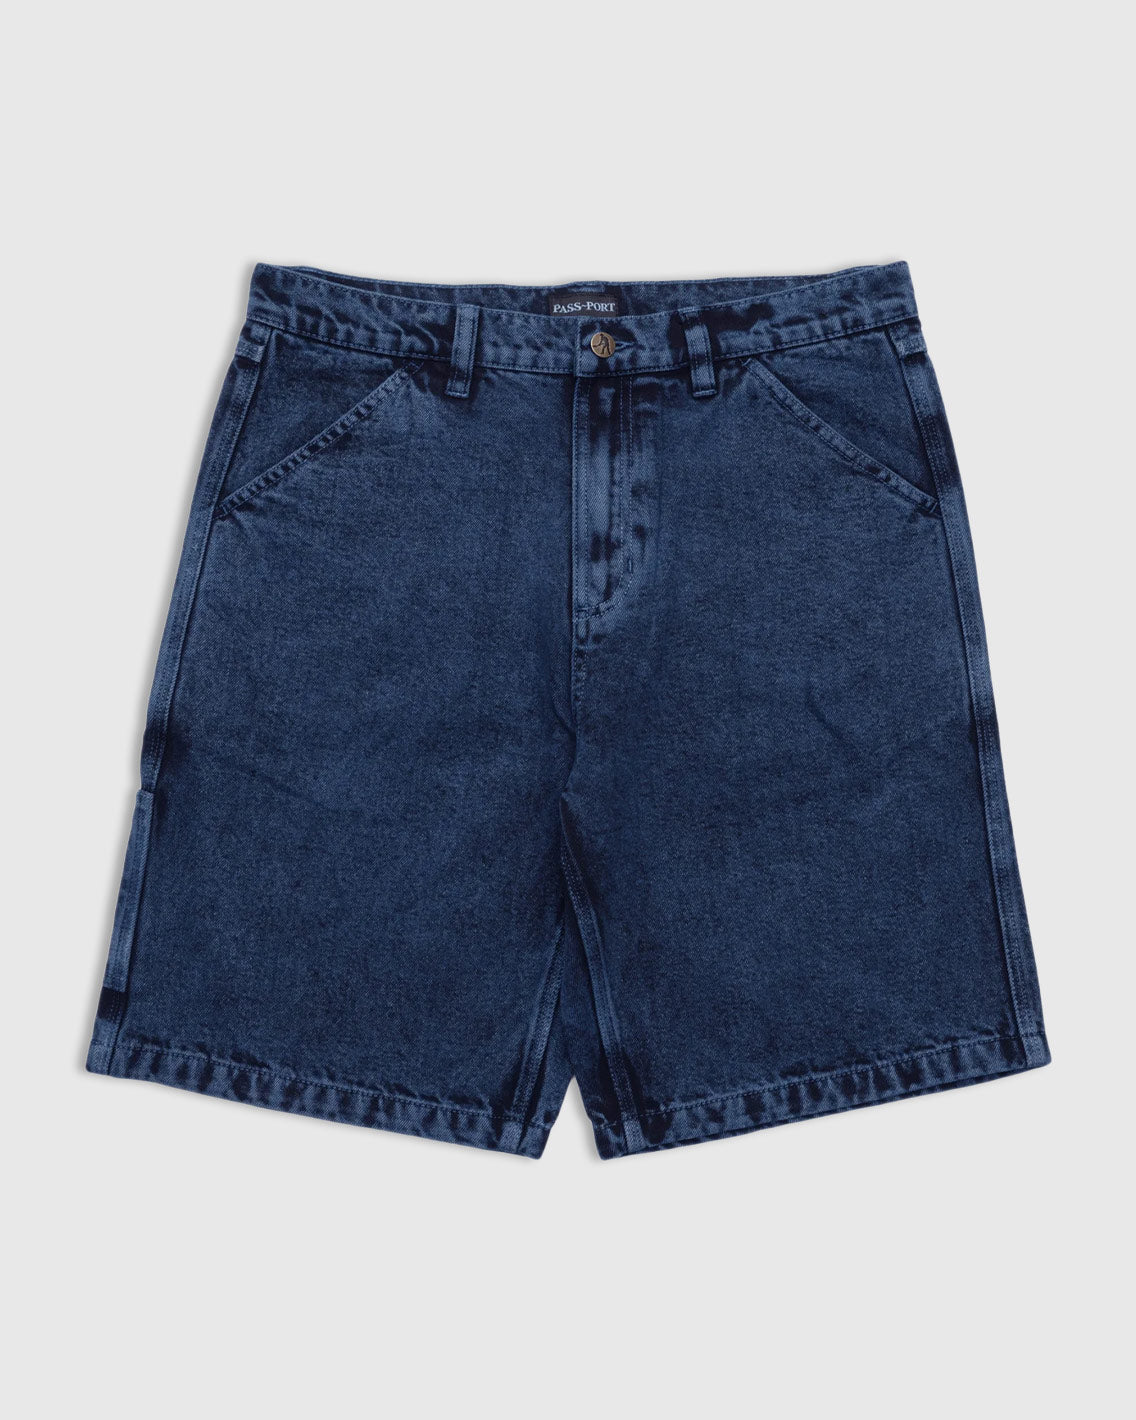 Pass~Port - Workers Club Short - Over-Dye Navy